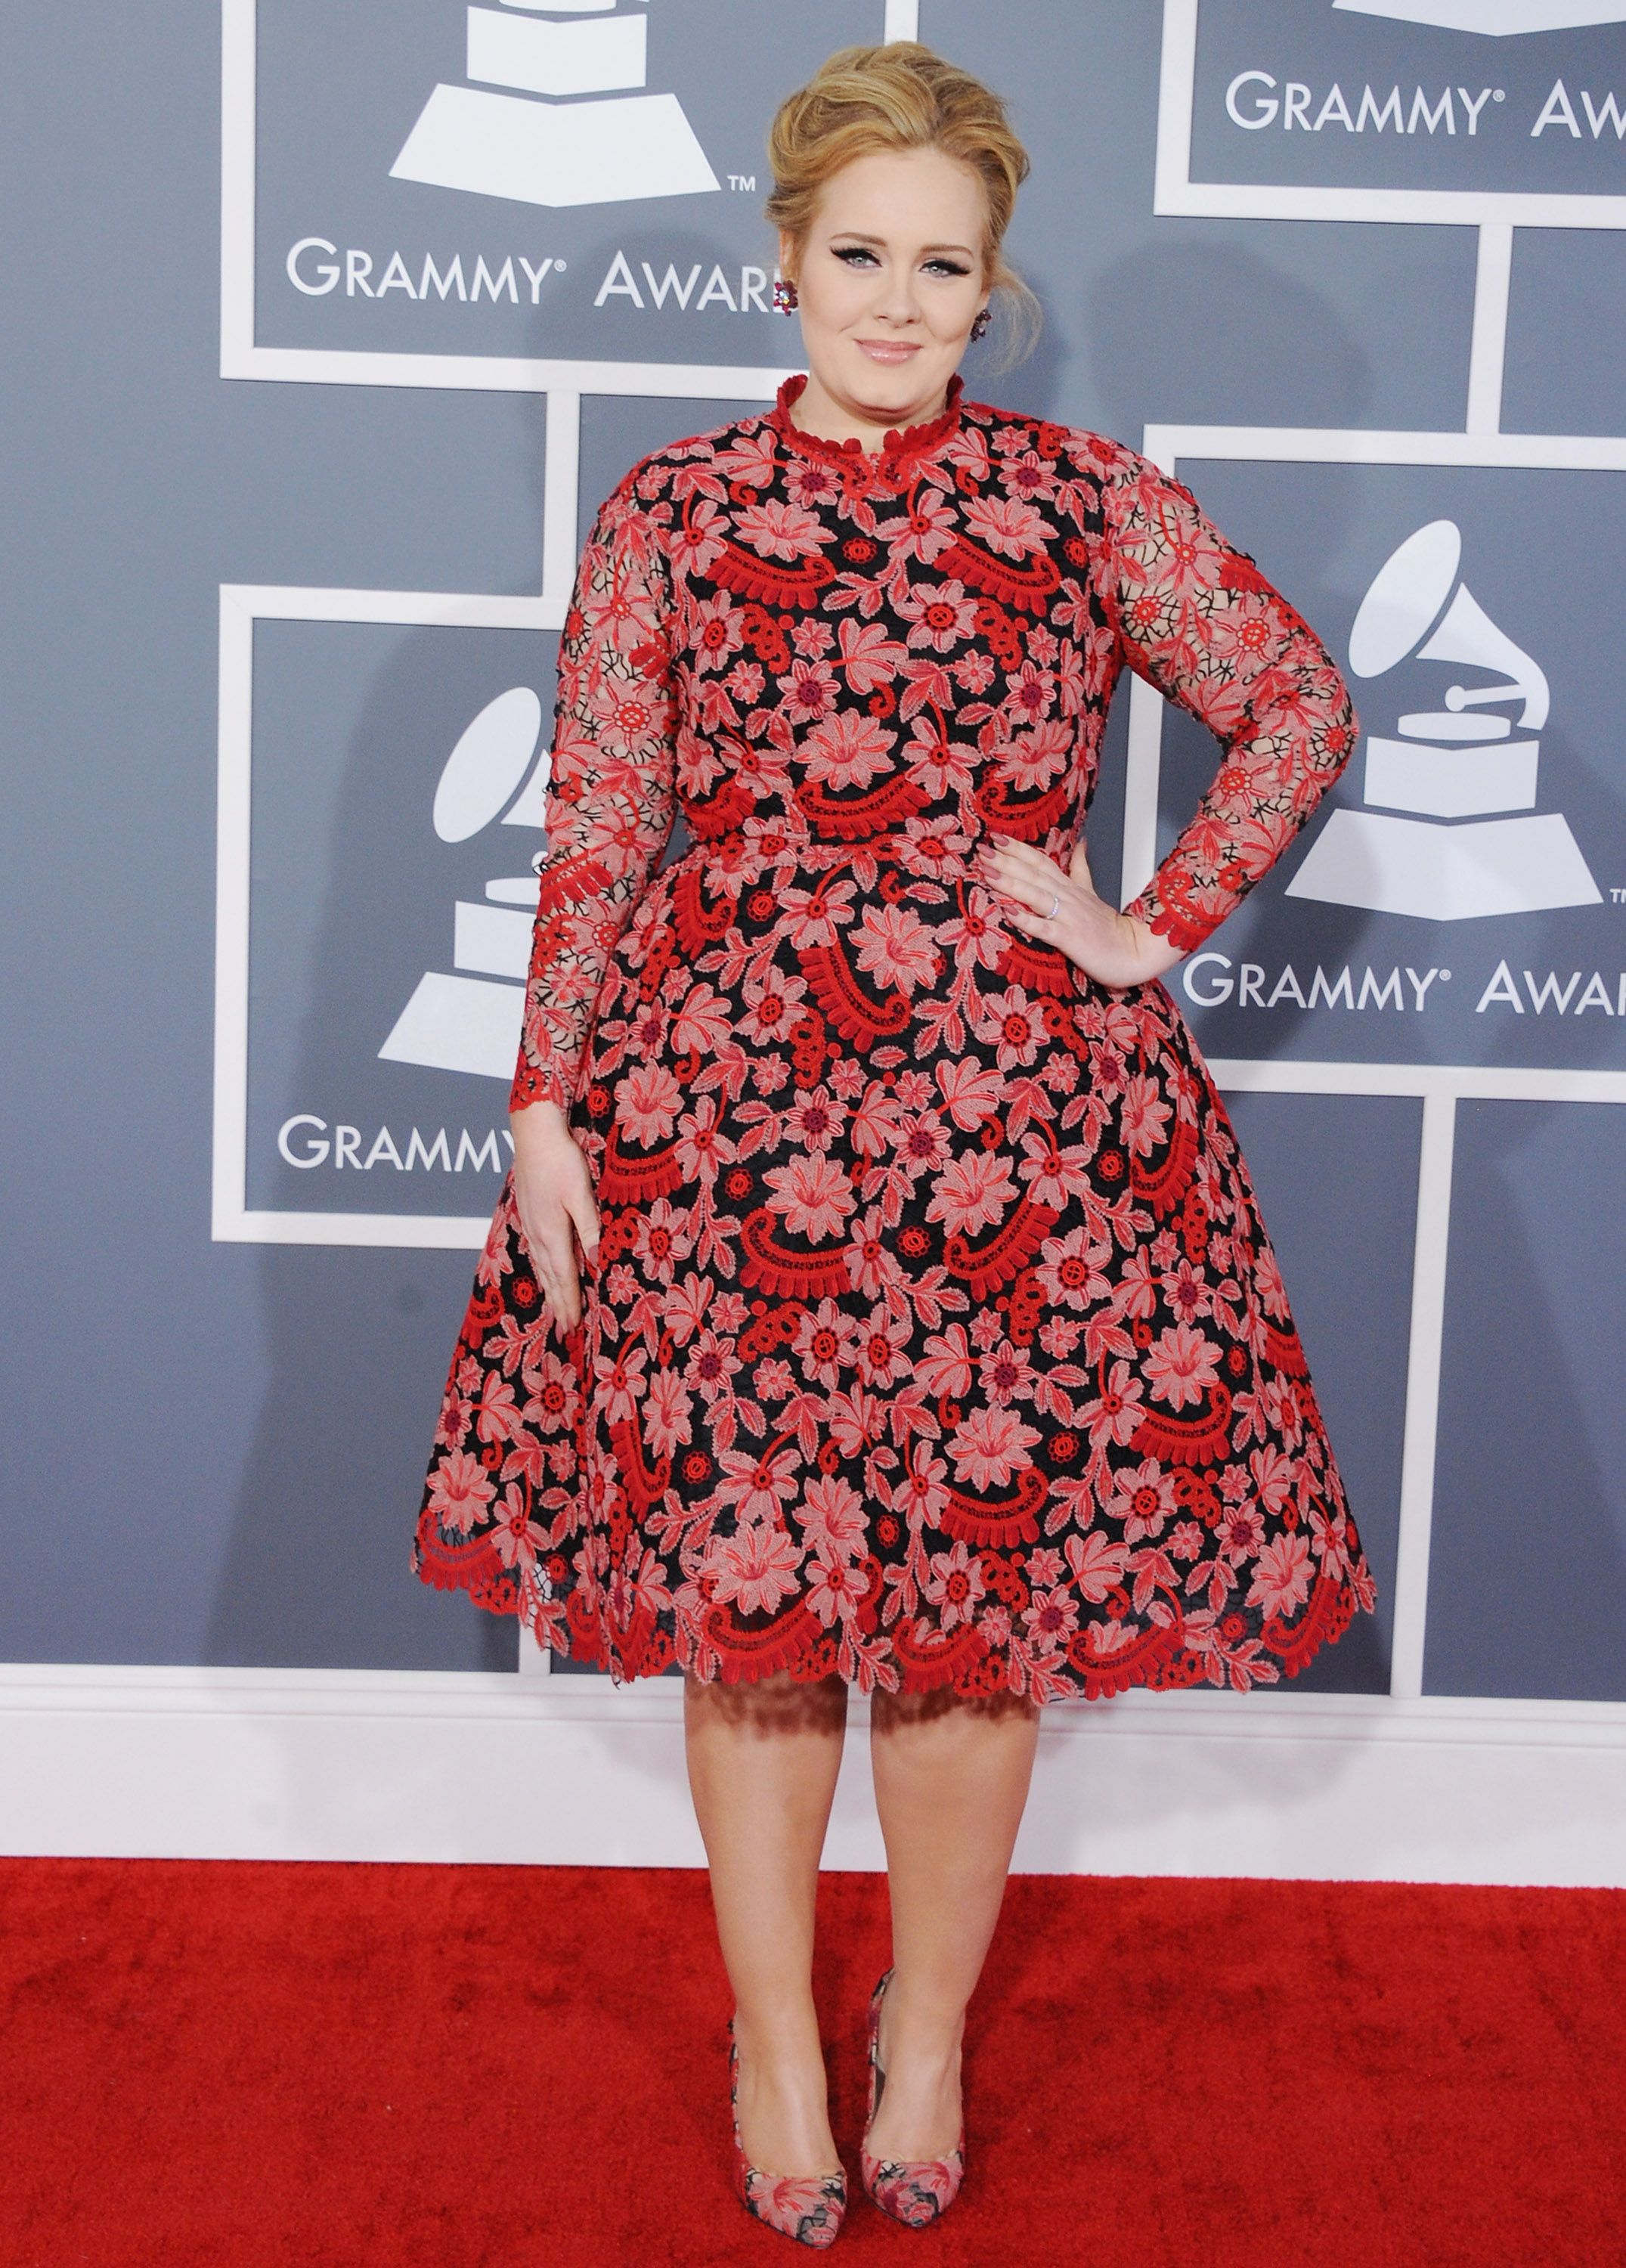 Adele Wears Green Givenchy Dress on the Grammys Red Carpet - Adele